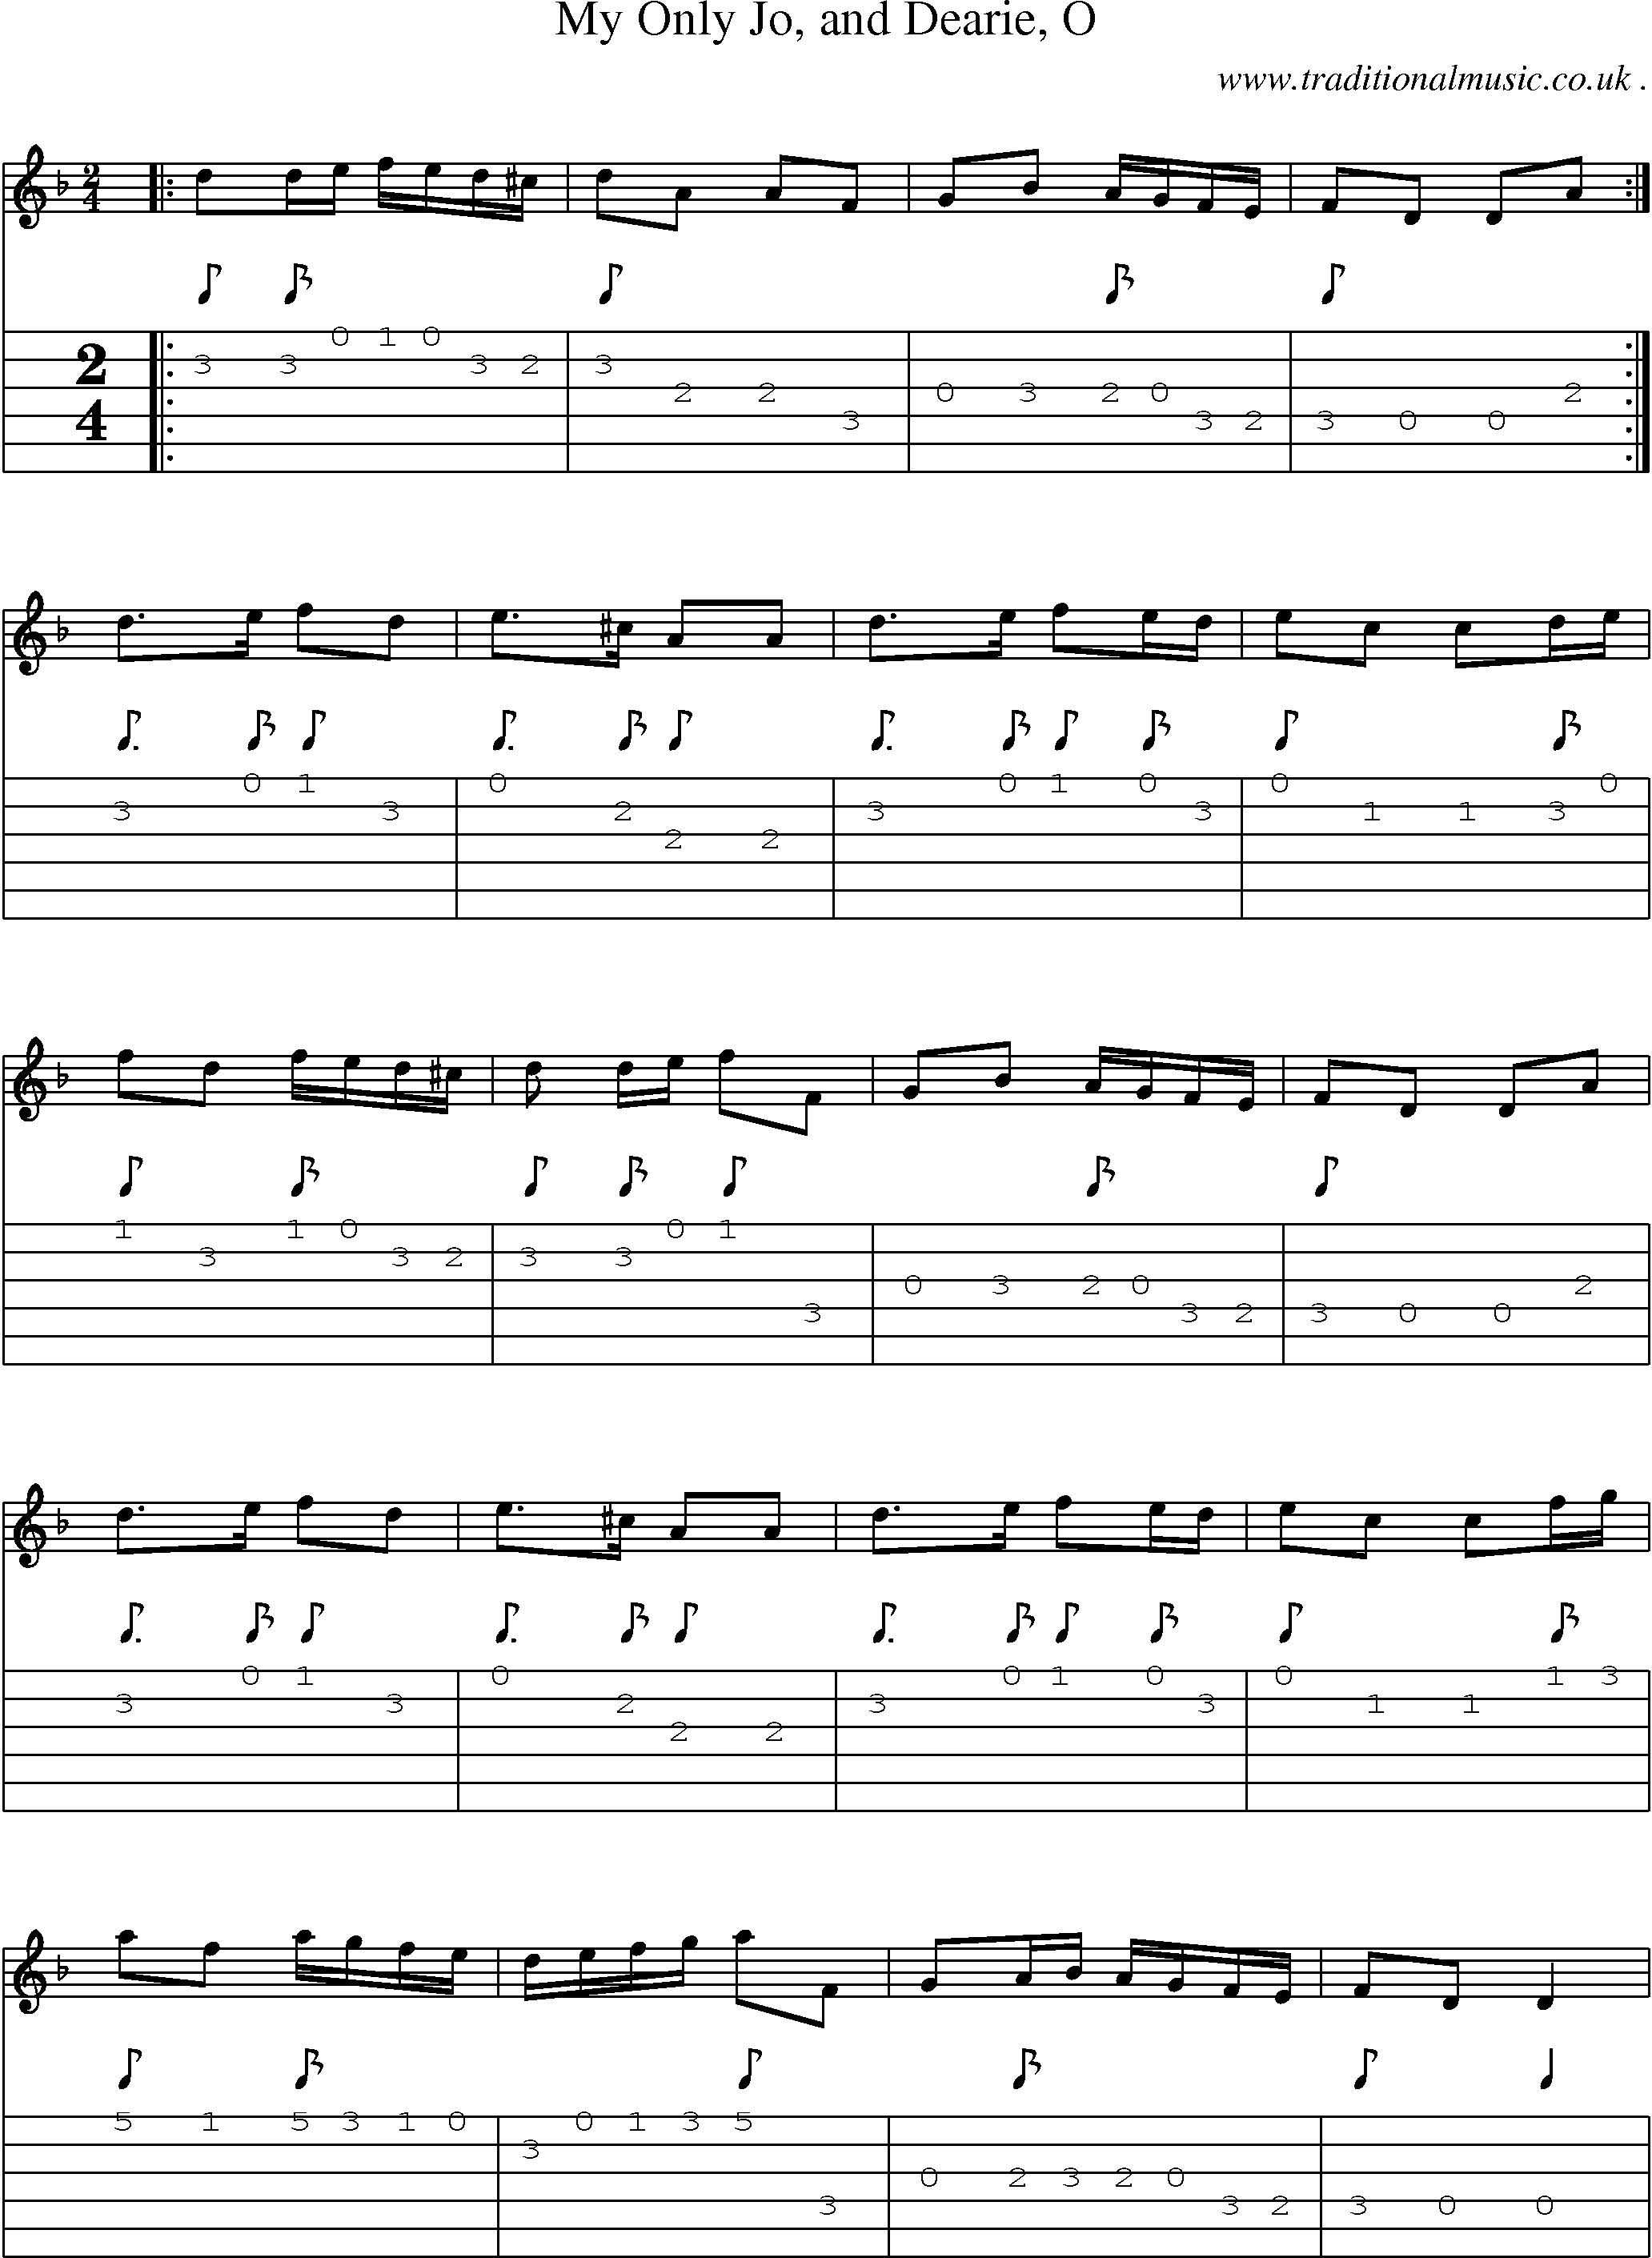 Sheet-Music and Guitar Tabs for My Only Jo And Dearie O